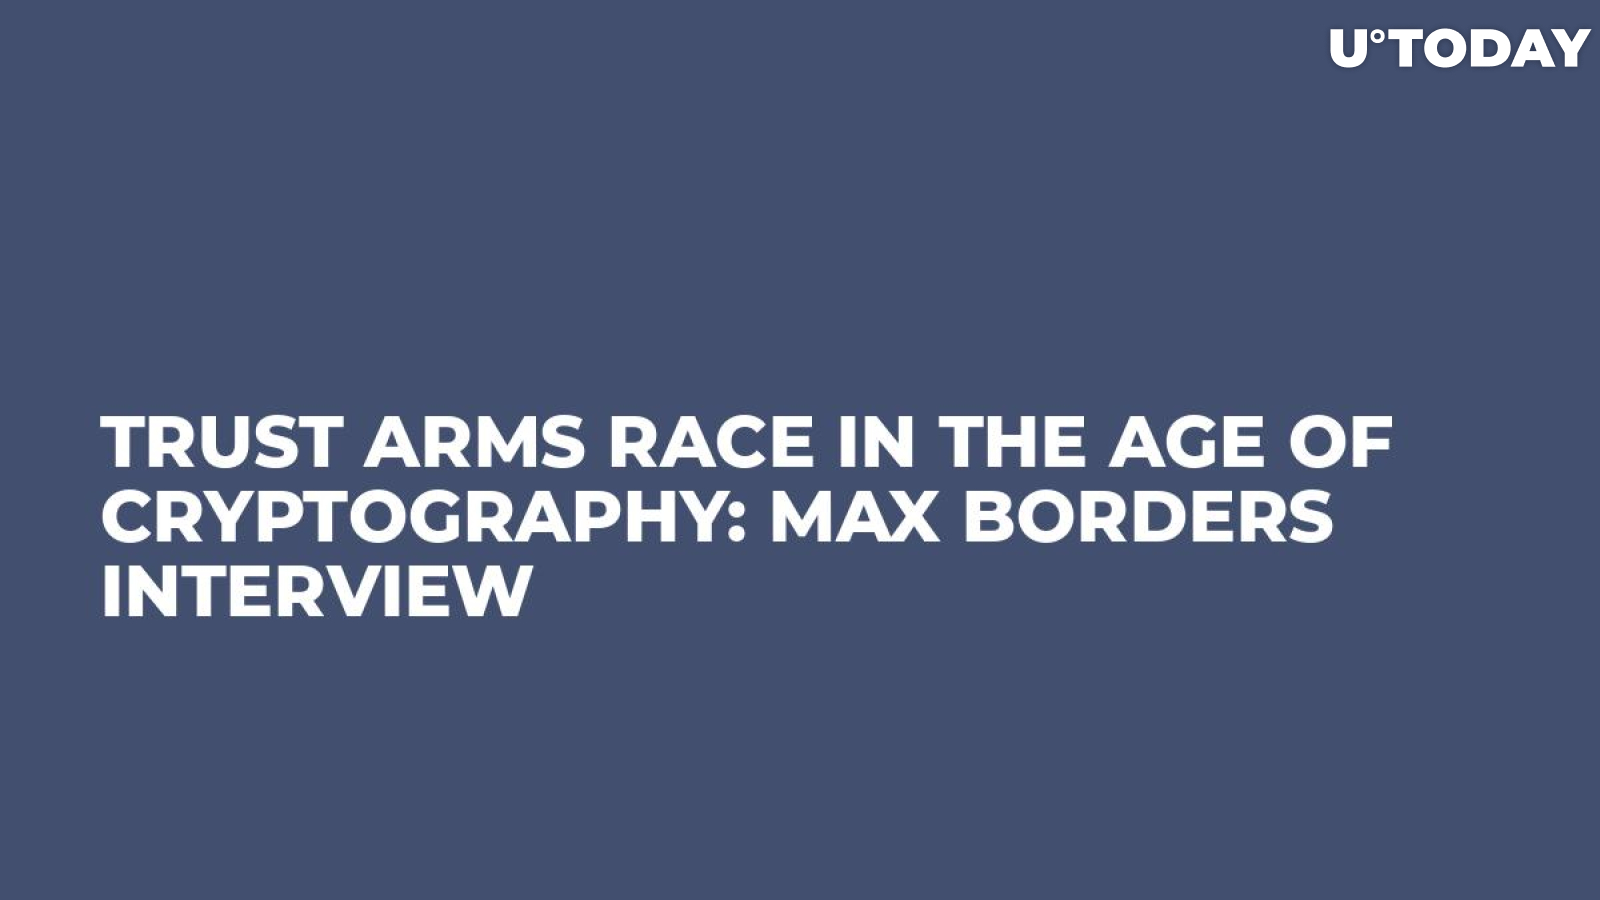 Trust Arms Race in the Age of Cryptography: Max Borders Interview